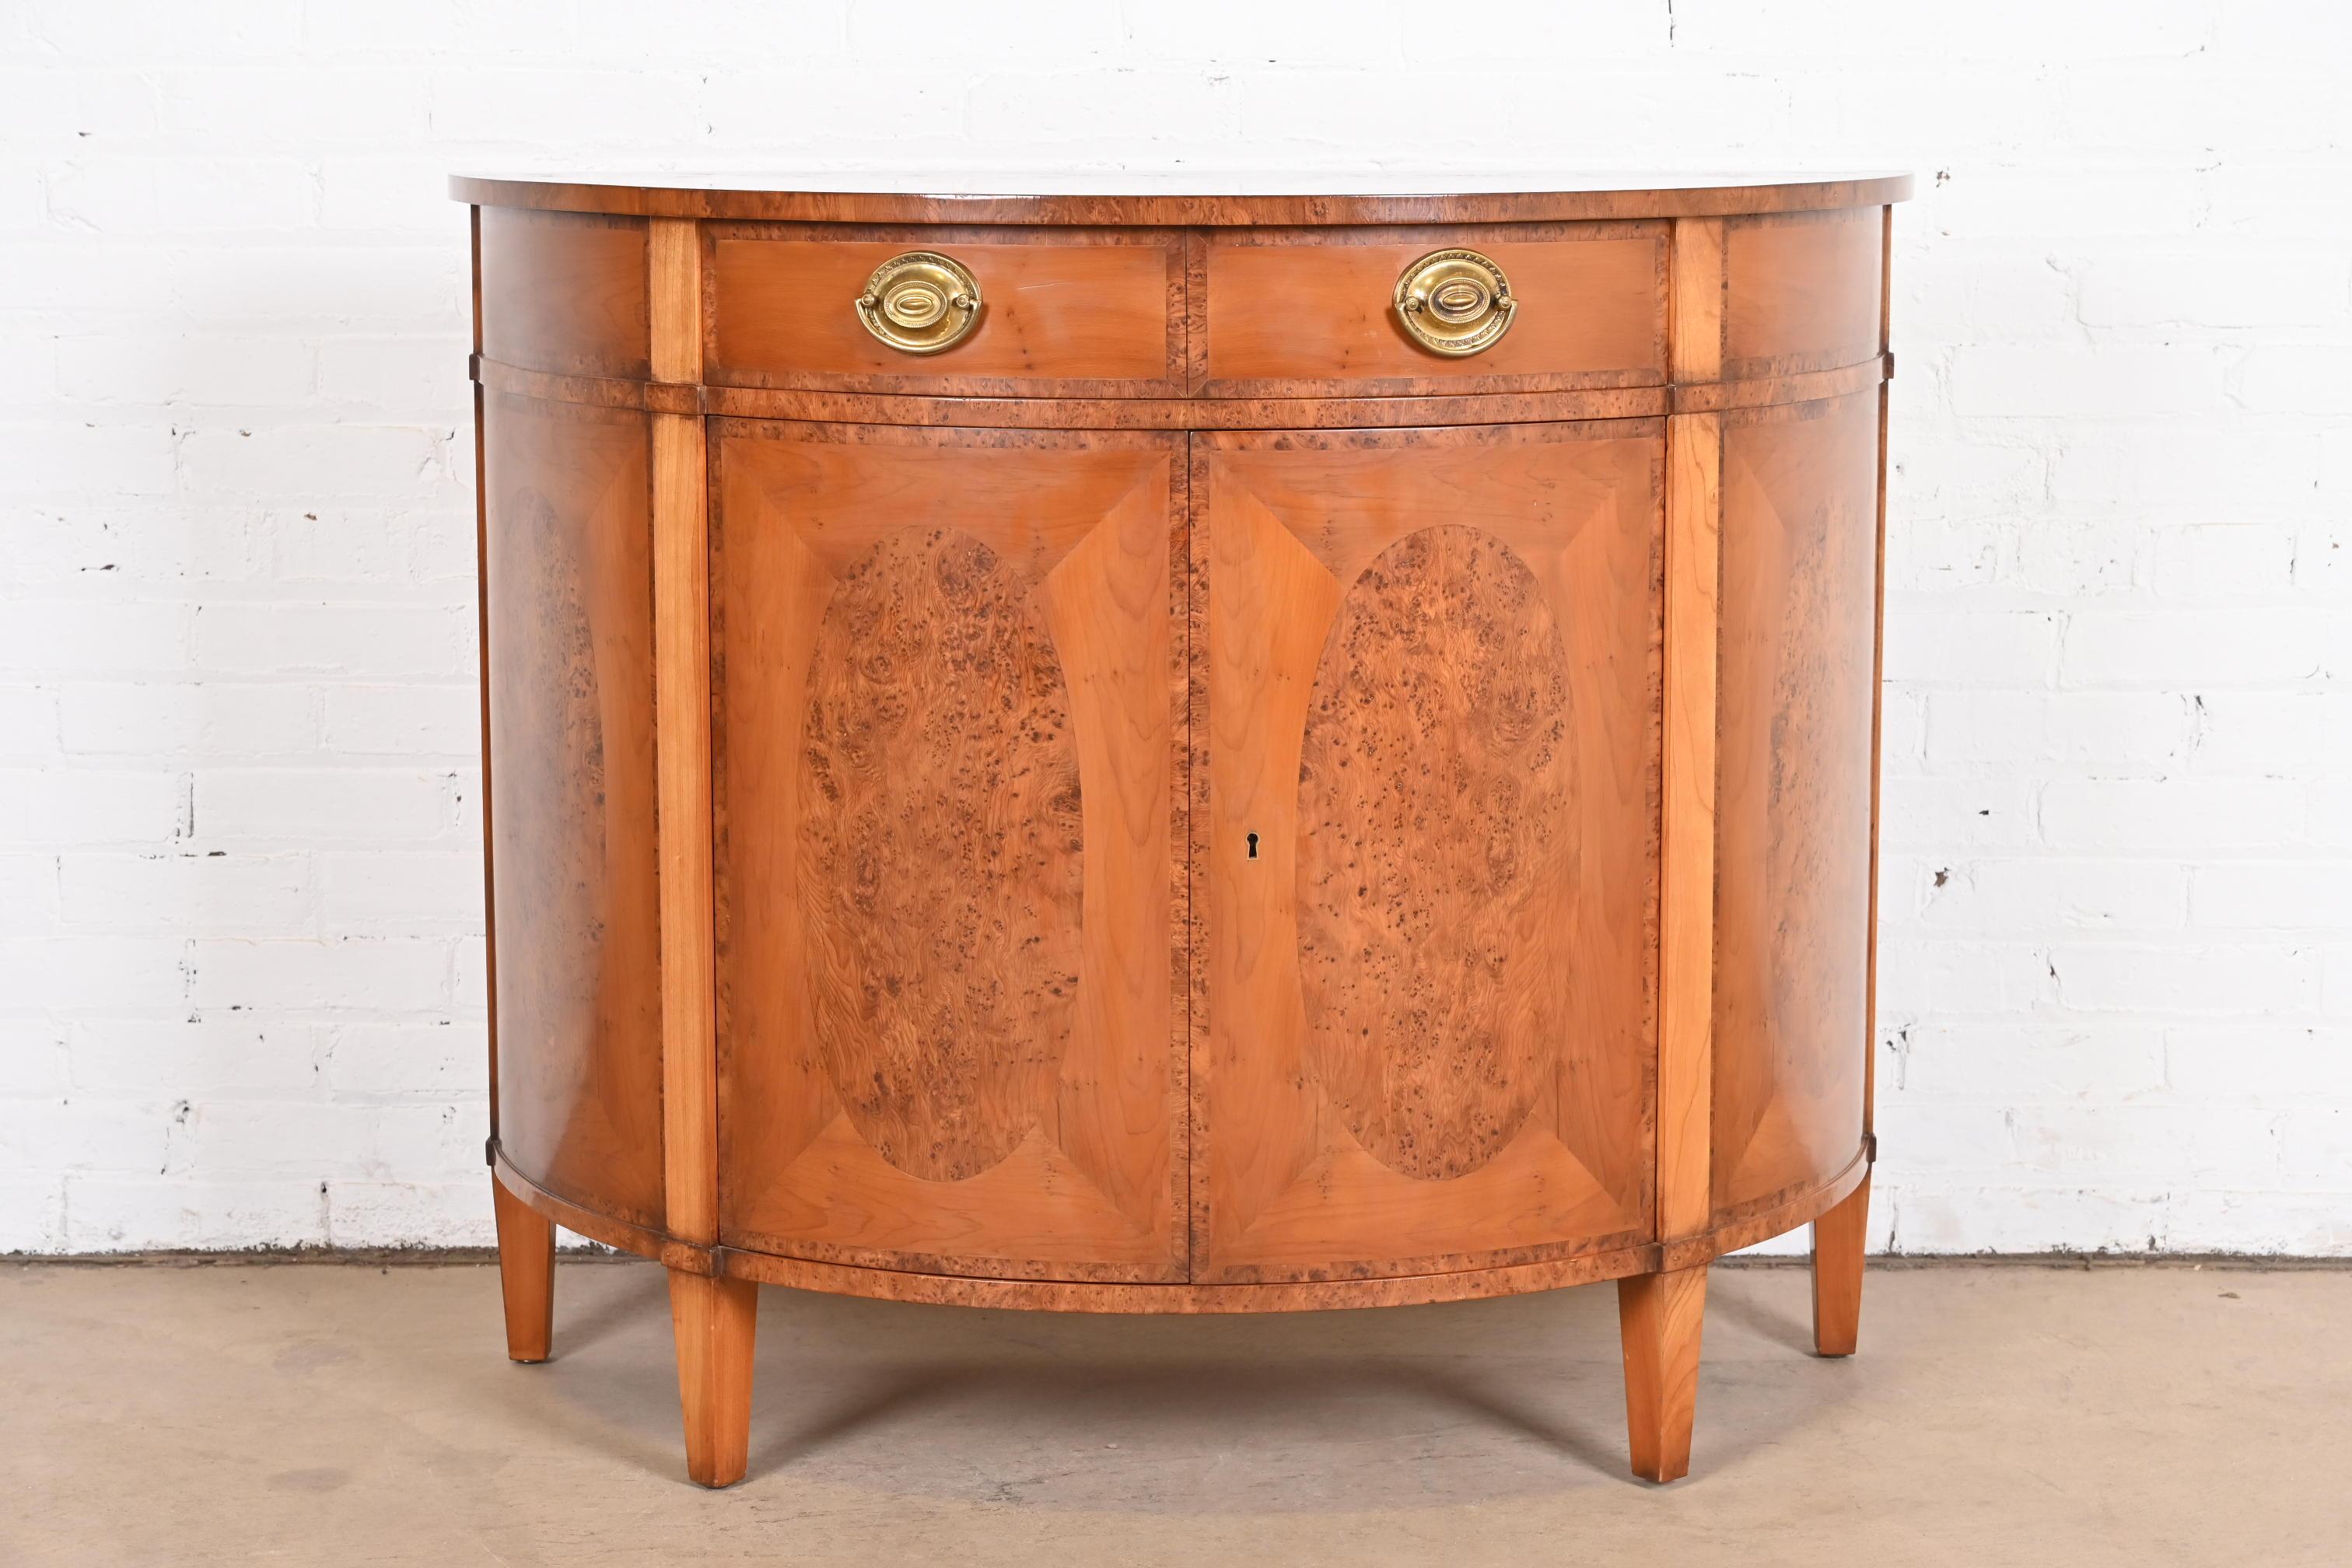 A gorgeous English Georgian or Federal style demilune sideboard, bar cabinet, or console table

By Smith & Watson

New York, USA, Late 20th century

Stunning inlaid burl wood and yew wood, with original brass hardware. Cabinet locks, and key